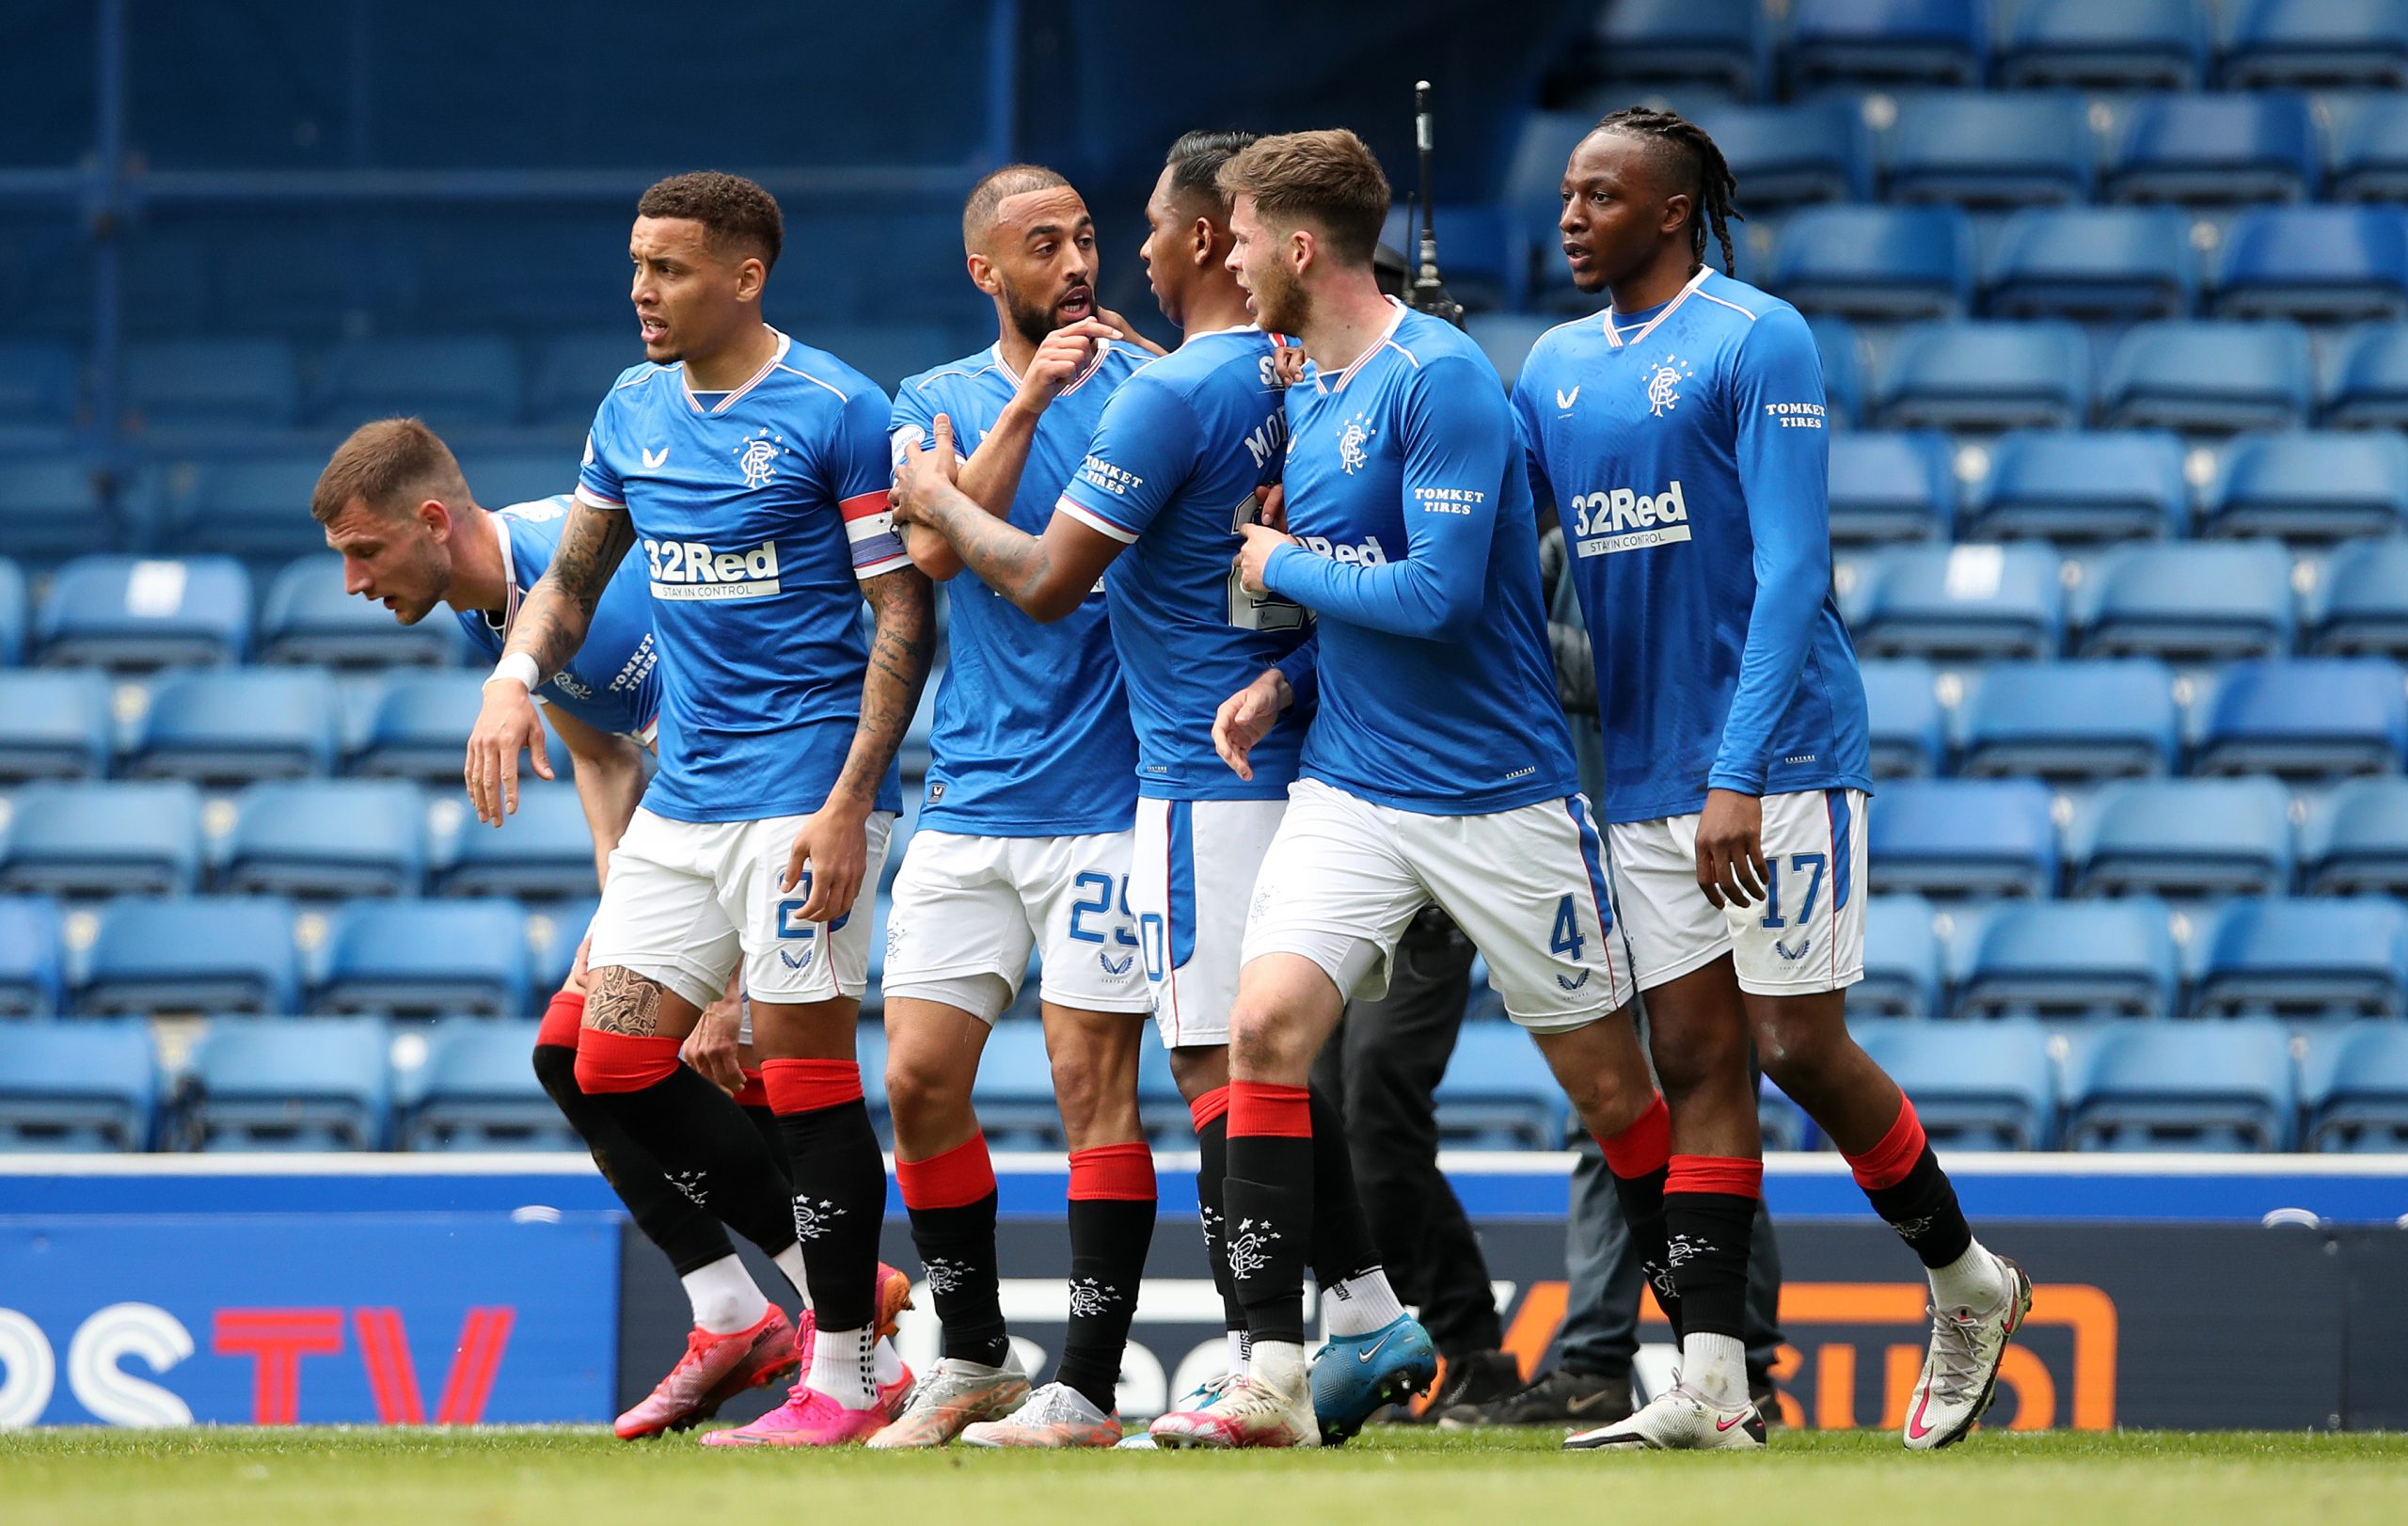 Rangers striking options Roofe and Morelos